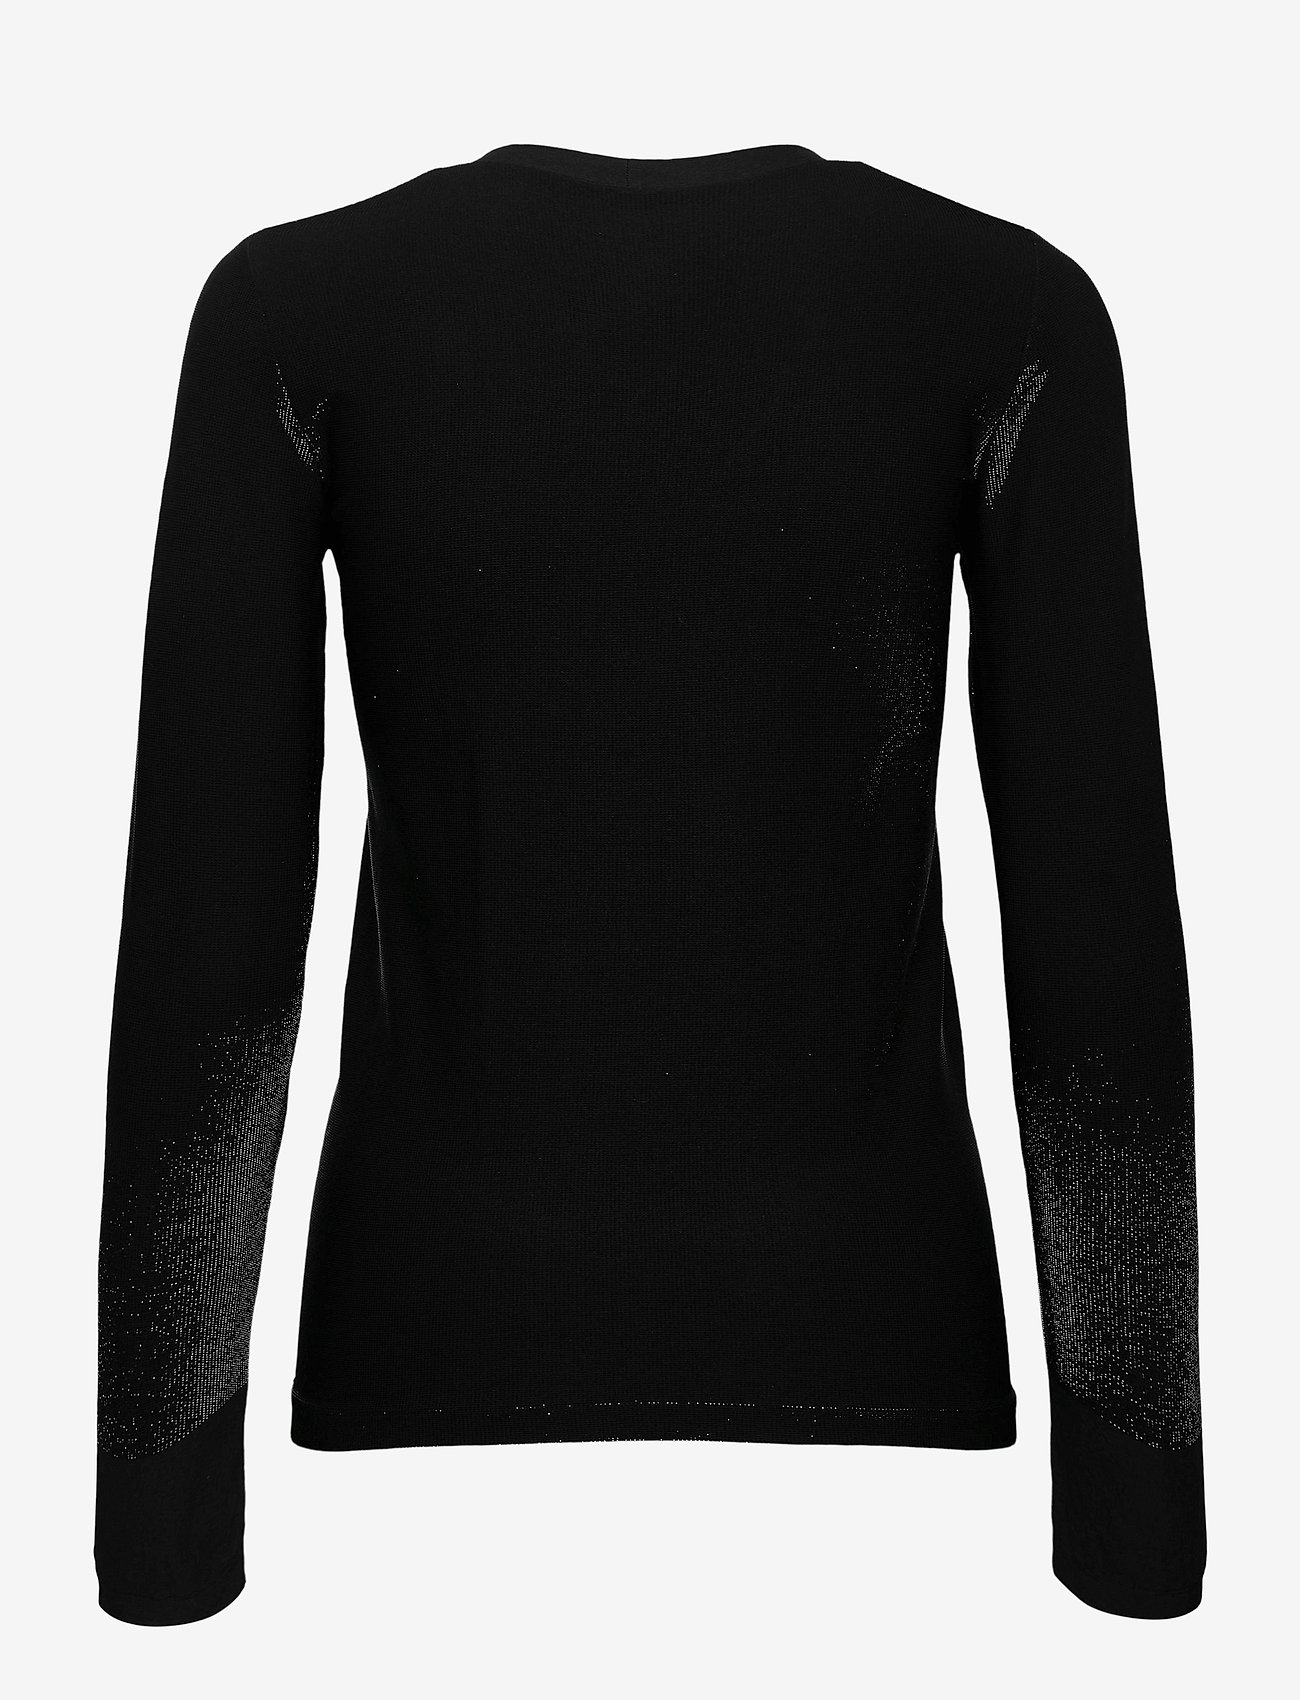 Wolford - Wilma Pullover - long-sleeved tops - black/black - 1